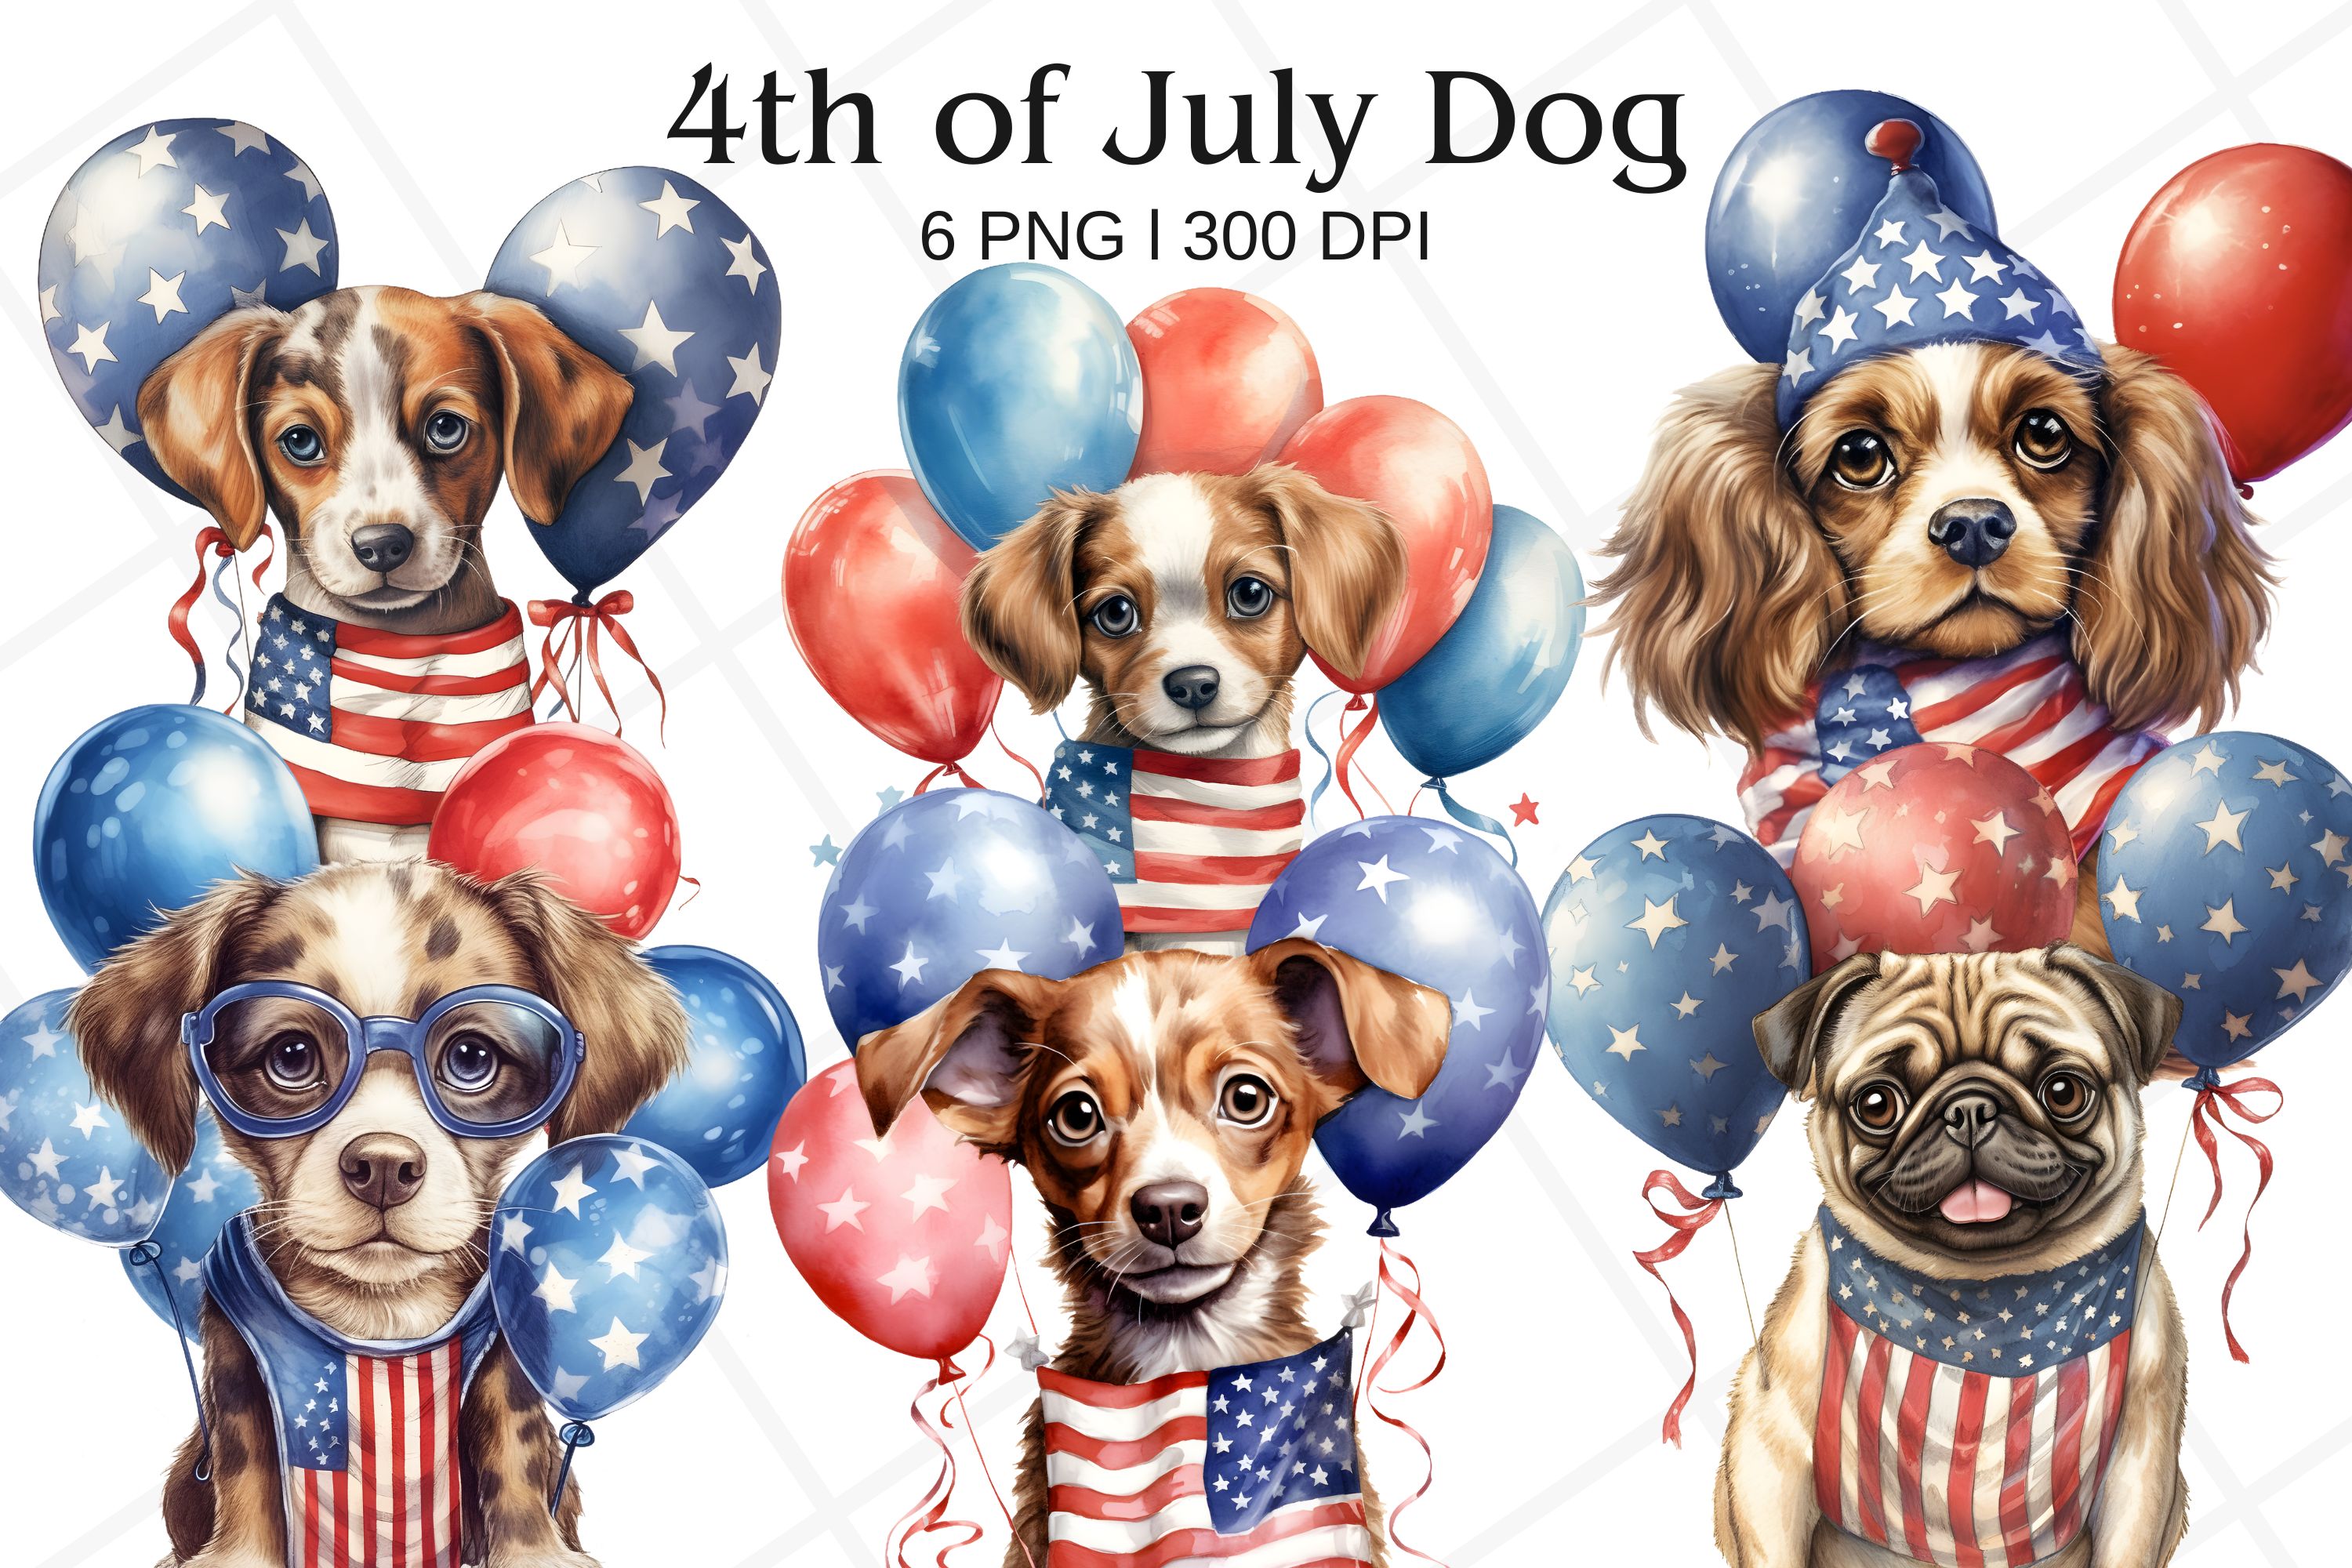 4th of July Dog Watercolor Clipart Graphic by Rabbyx · Creative Fabrica